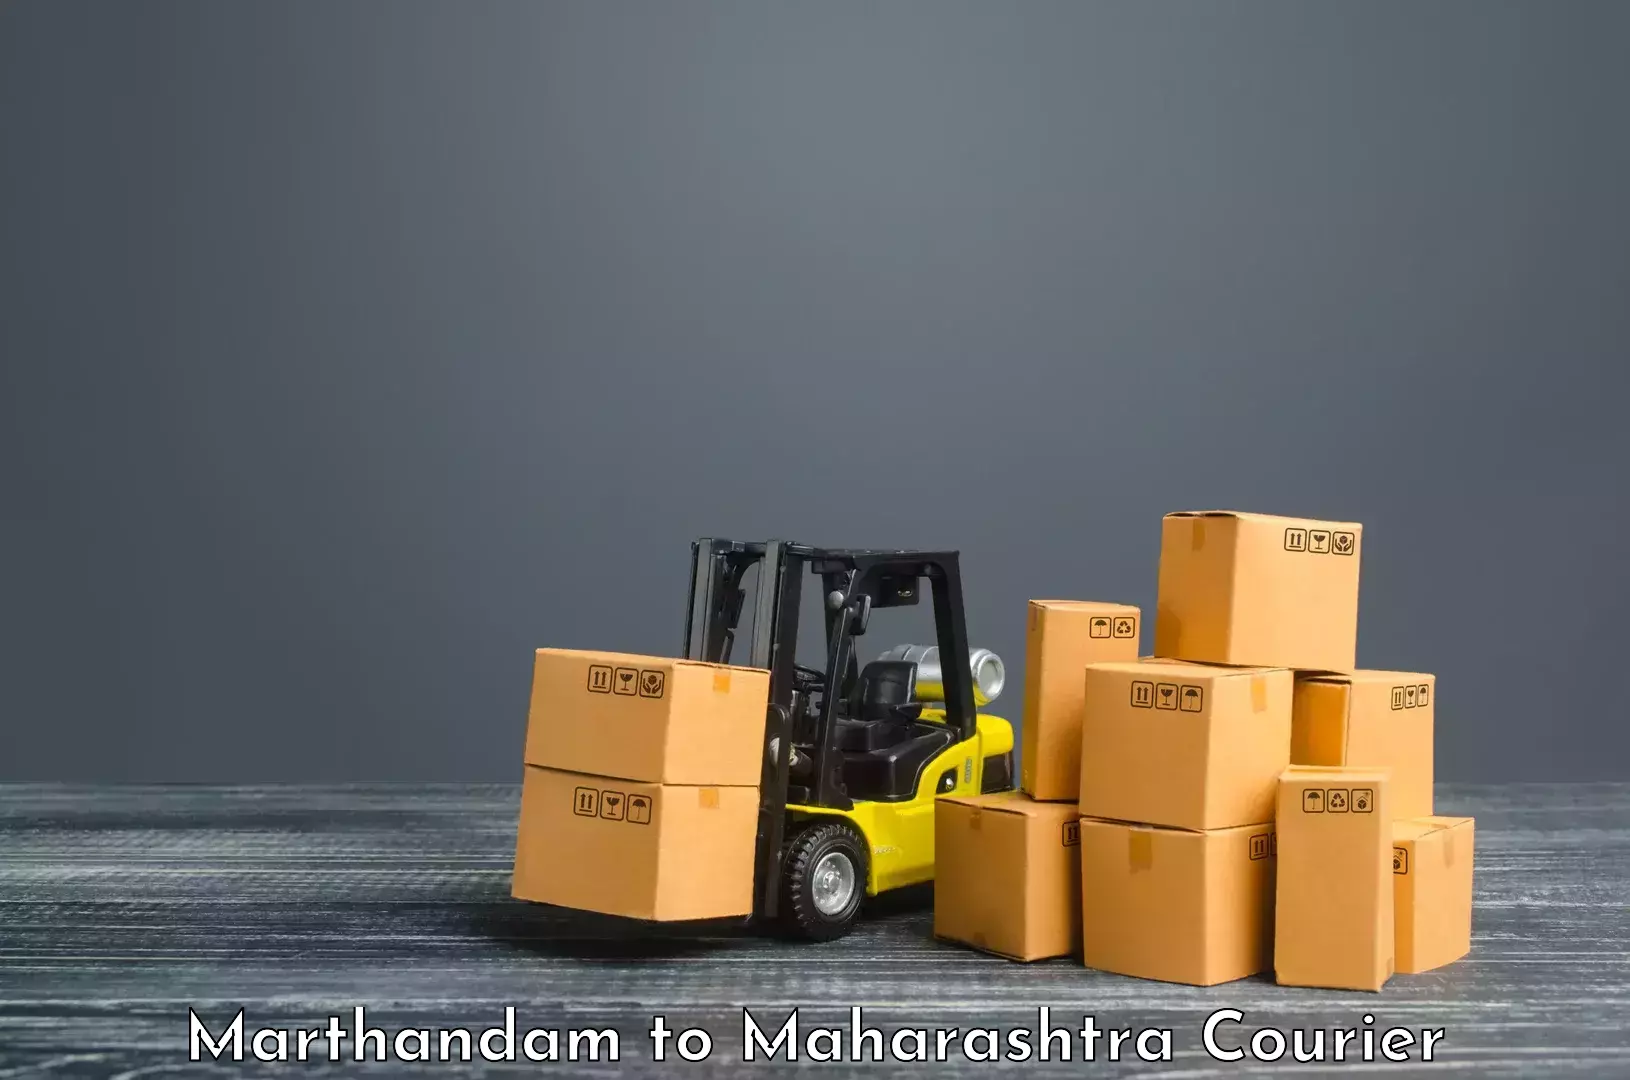 Affordable parcel service Marthandam to Pune